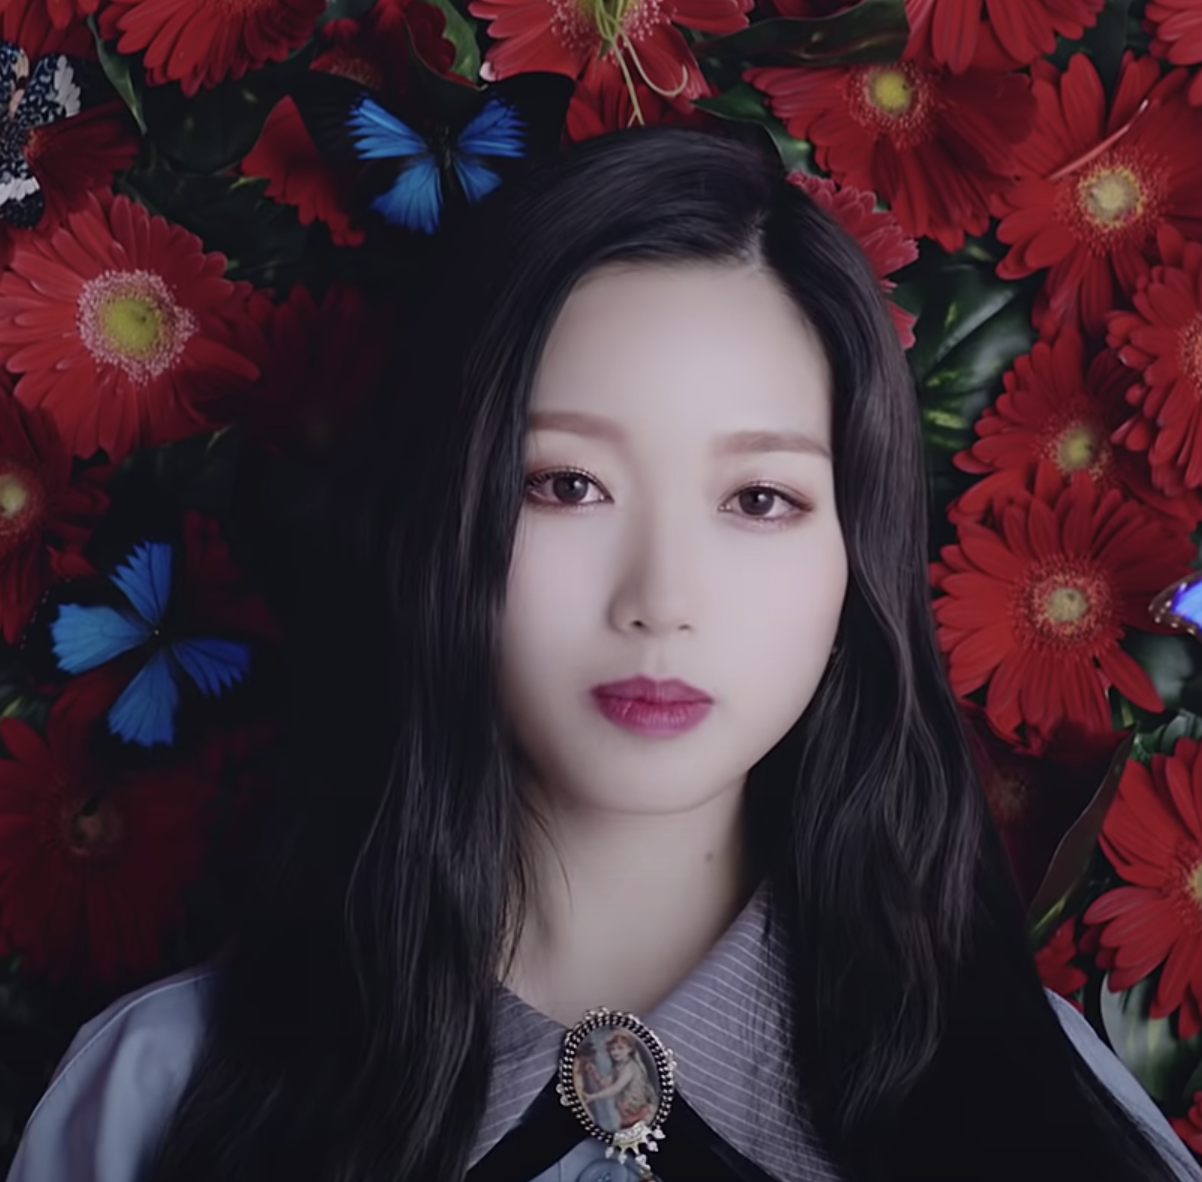 Go Won stands in front of a wall of flowers and butterflies